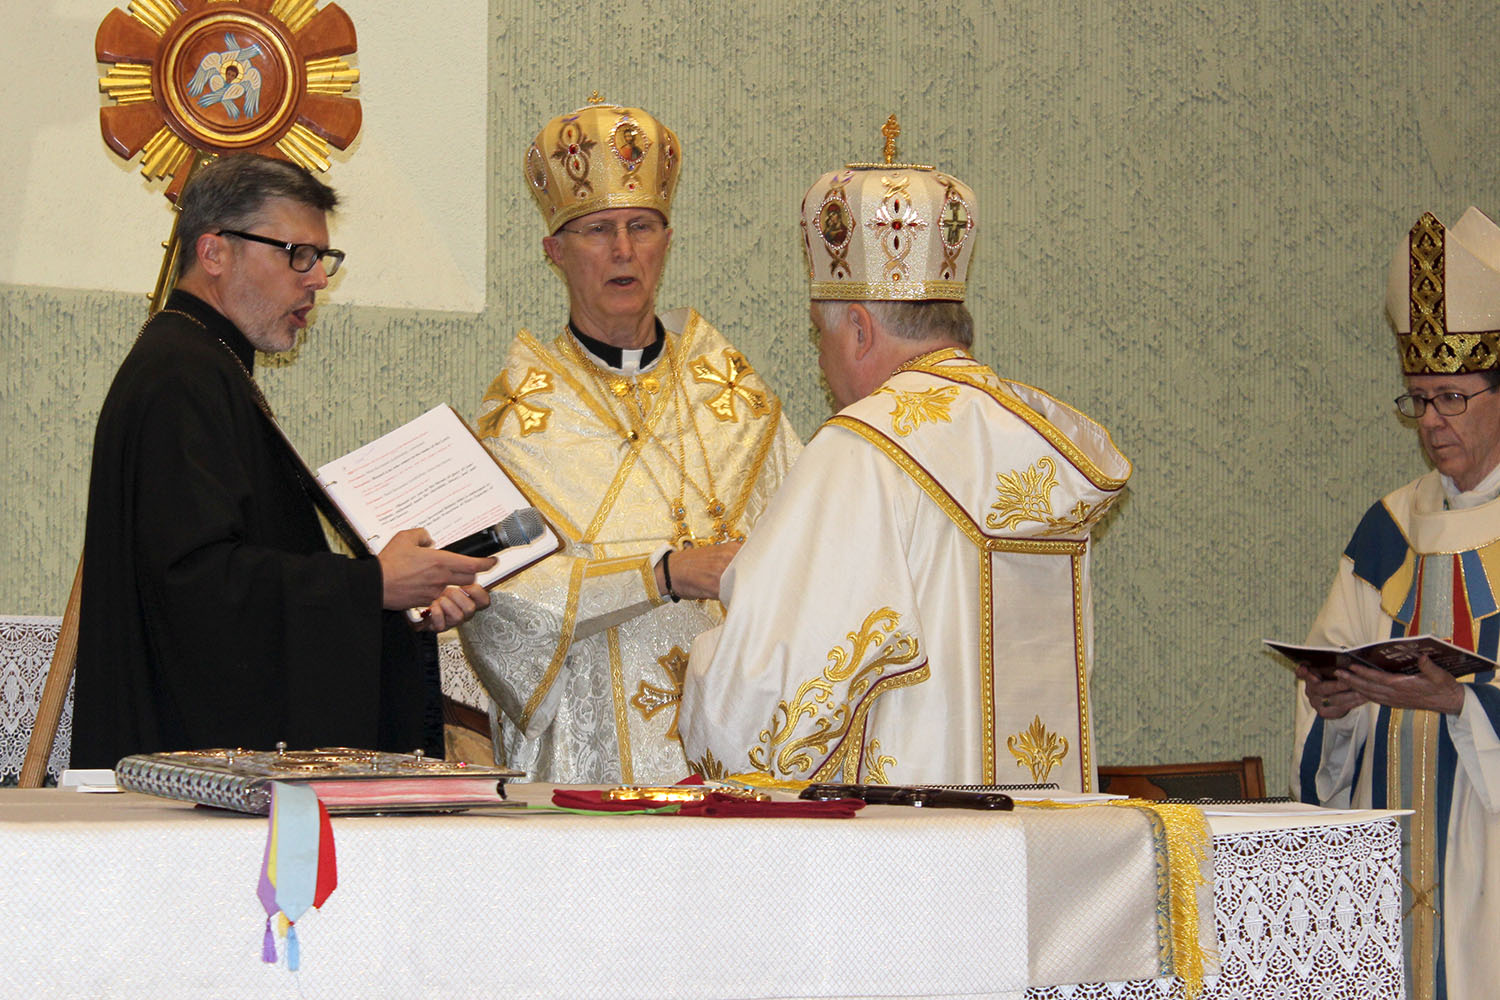 Bishop John Pazak is enthroned as the fifth bishop of the Holy Protection of Mary Byzantine Eparchy of Phoenix by Metropolitan Archbishop William C. Skurla at St. Helen Roman Catholic Parish July 20. (Photo courtesy of Kathleen Slonka, Eparchy of Phoenix)